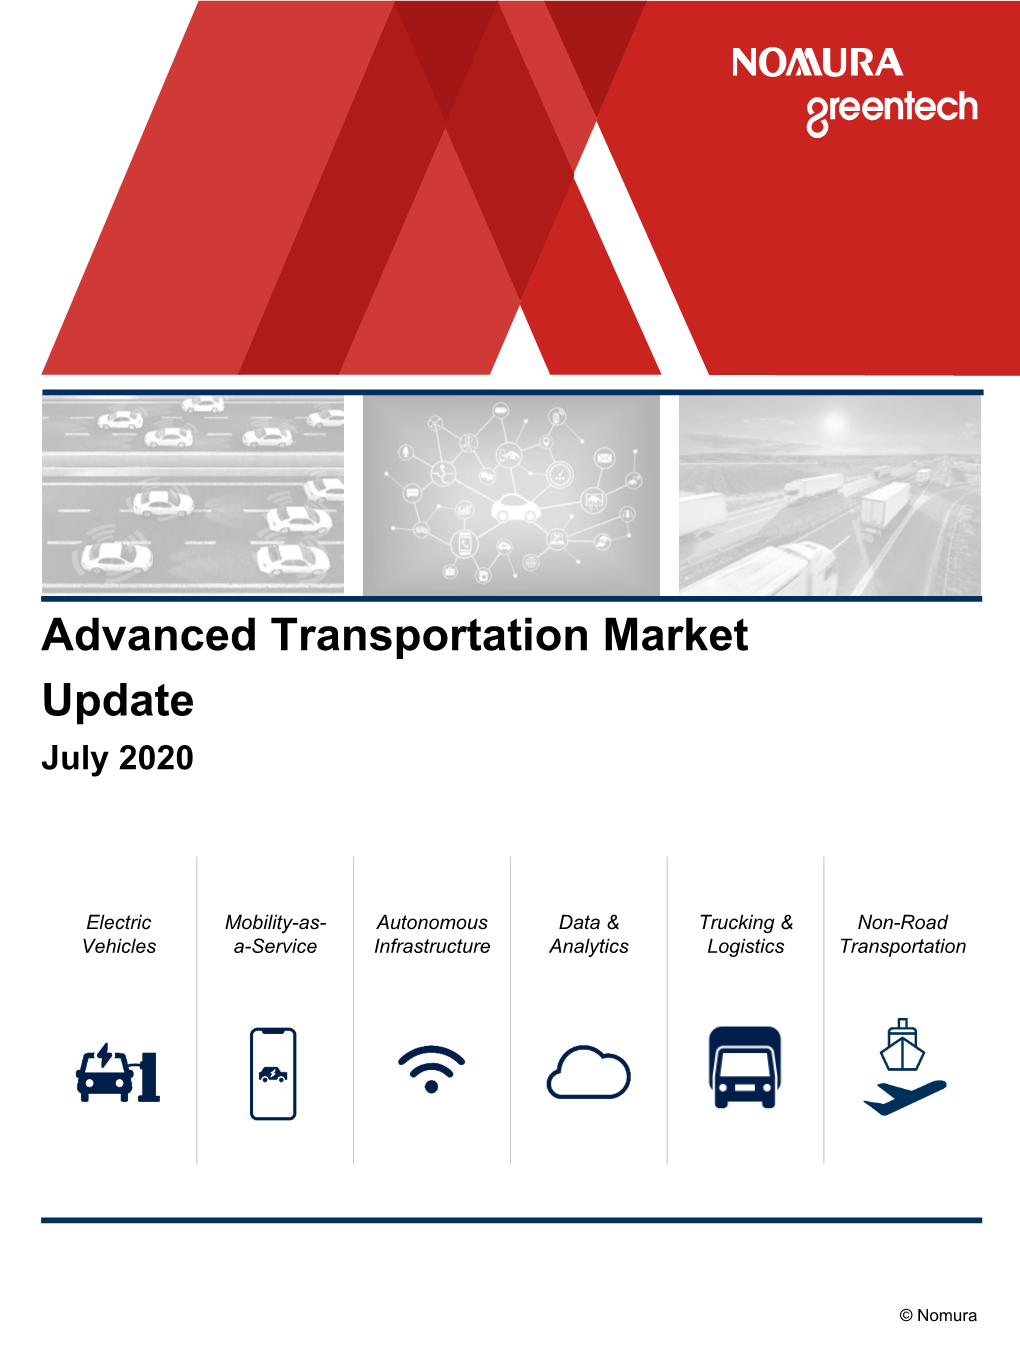 July 2020 Advanced Transportation Monthly Update